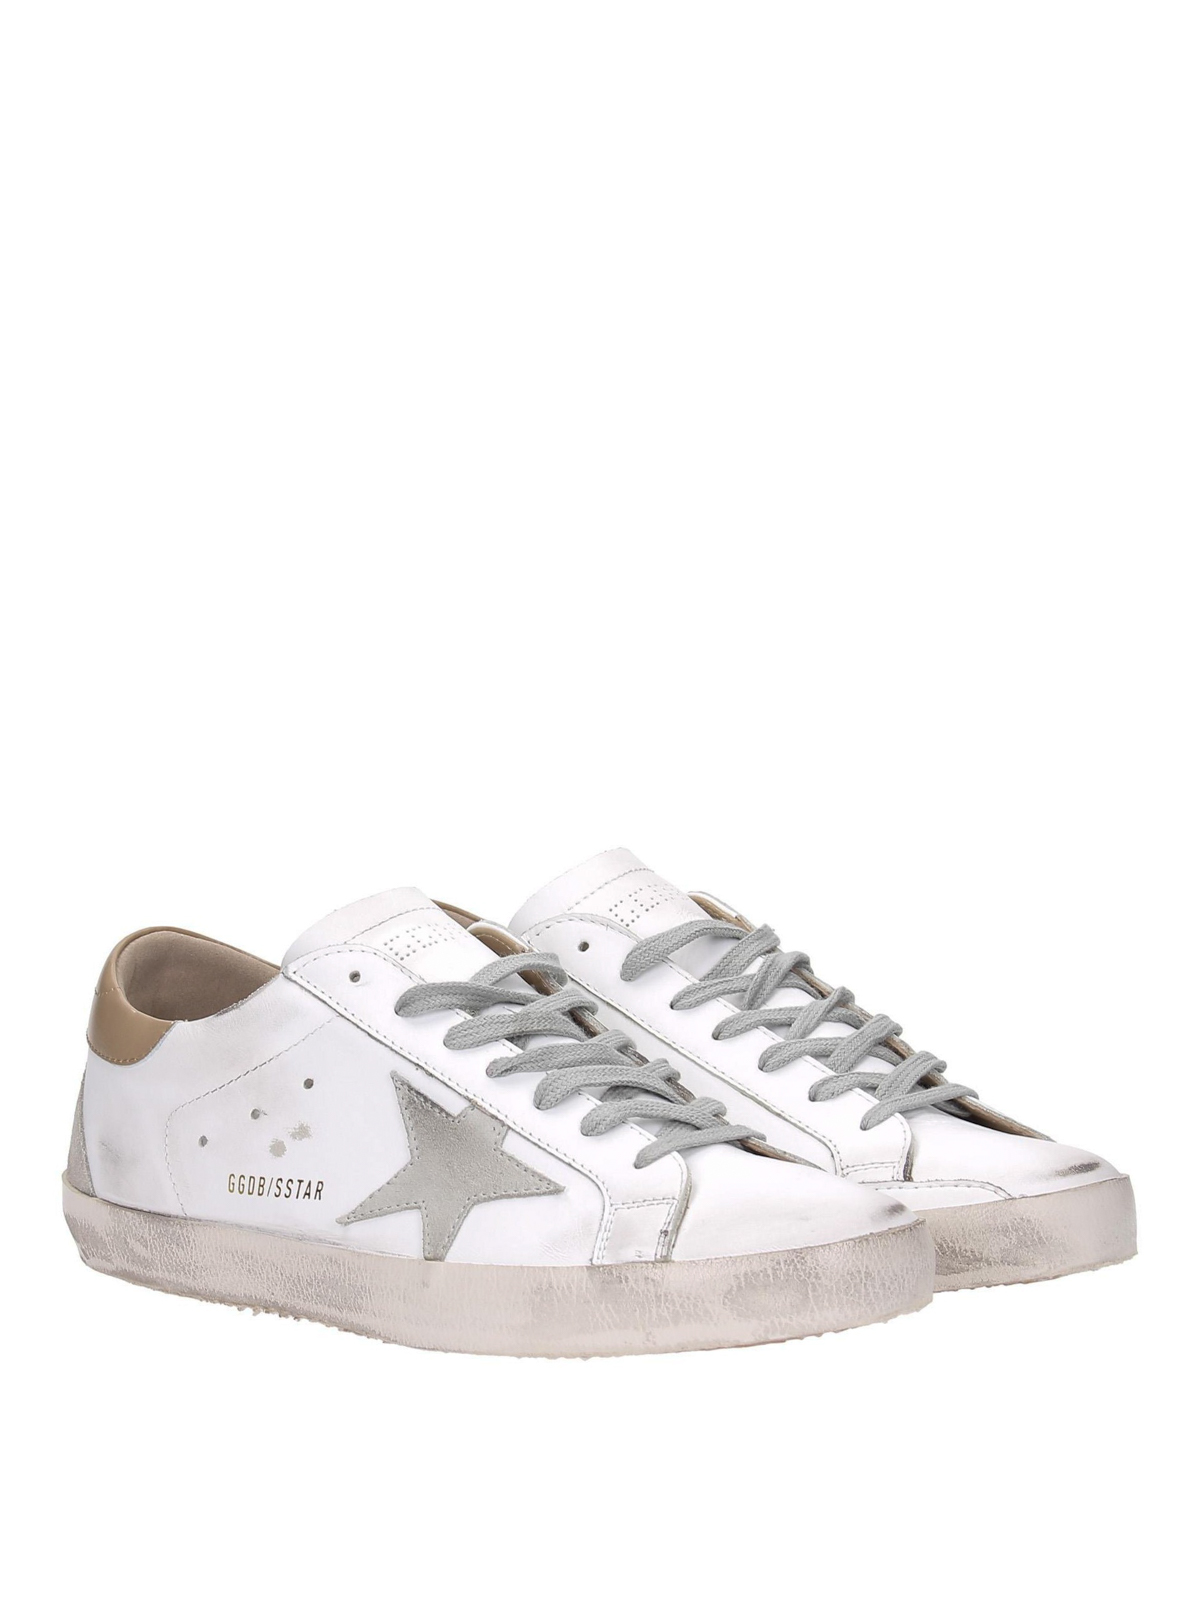 white and nude trainers